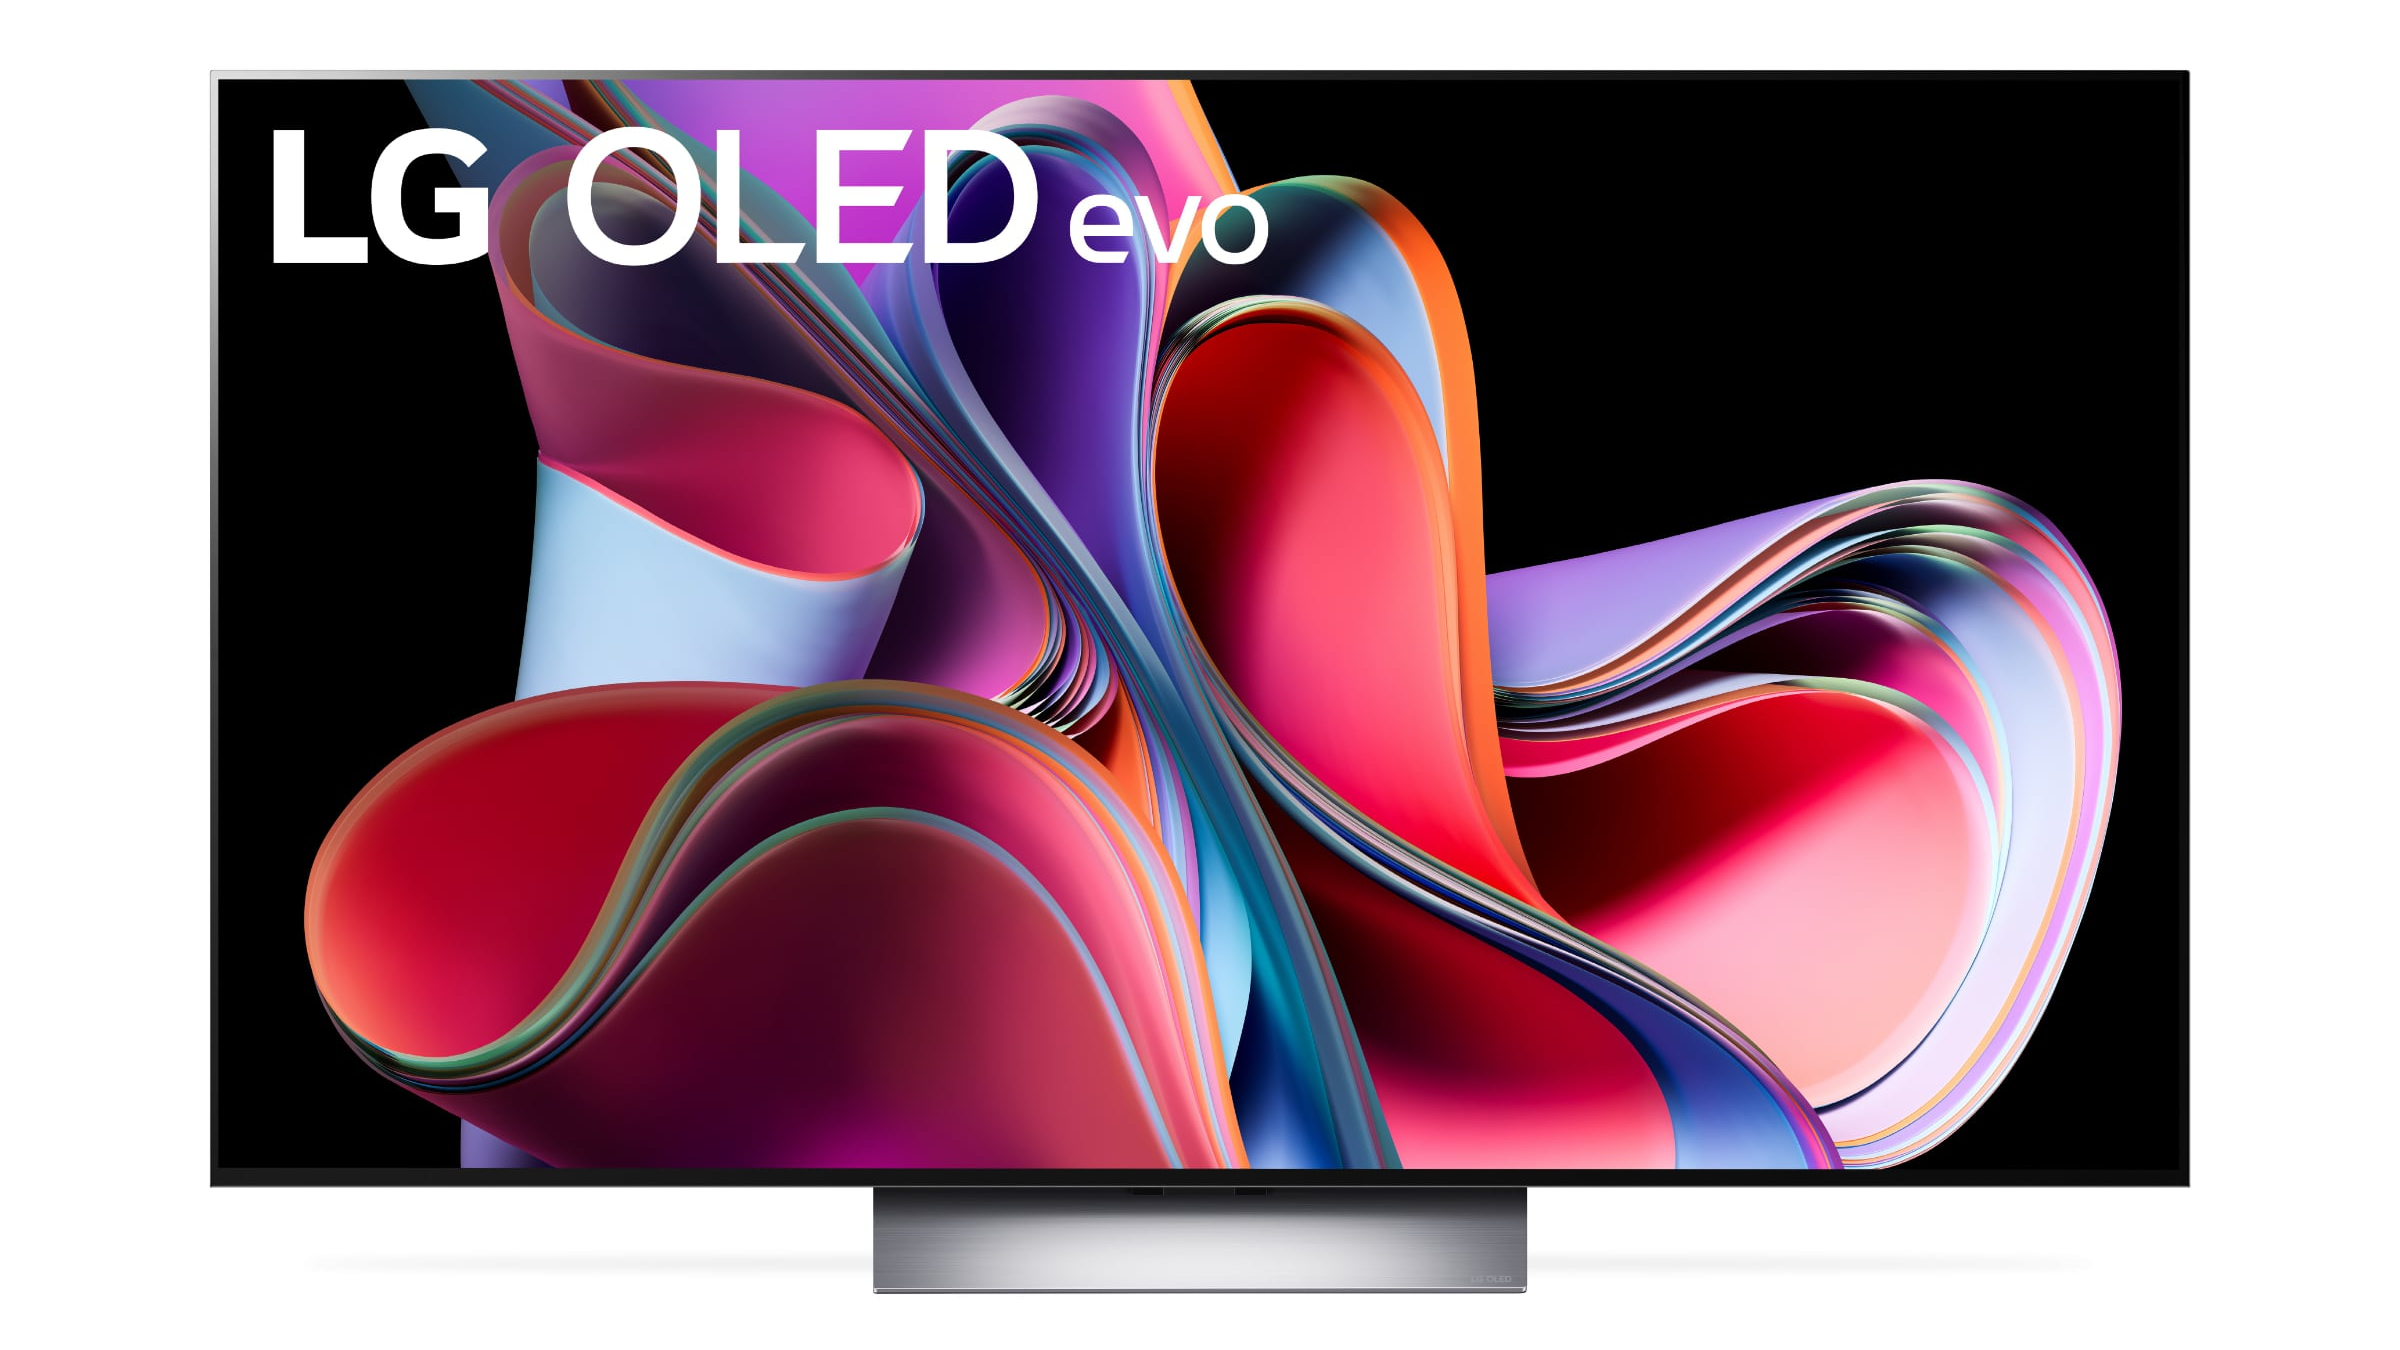 I've looked through LG's new transparent OLED TV and seen